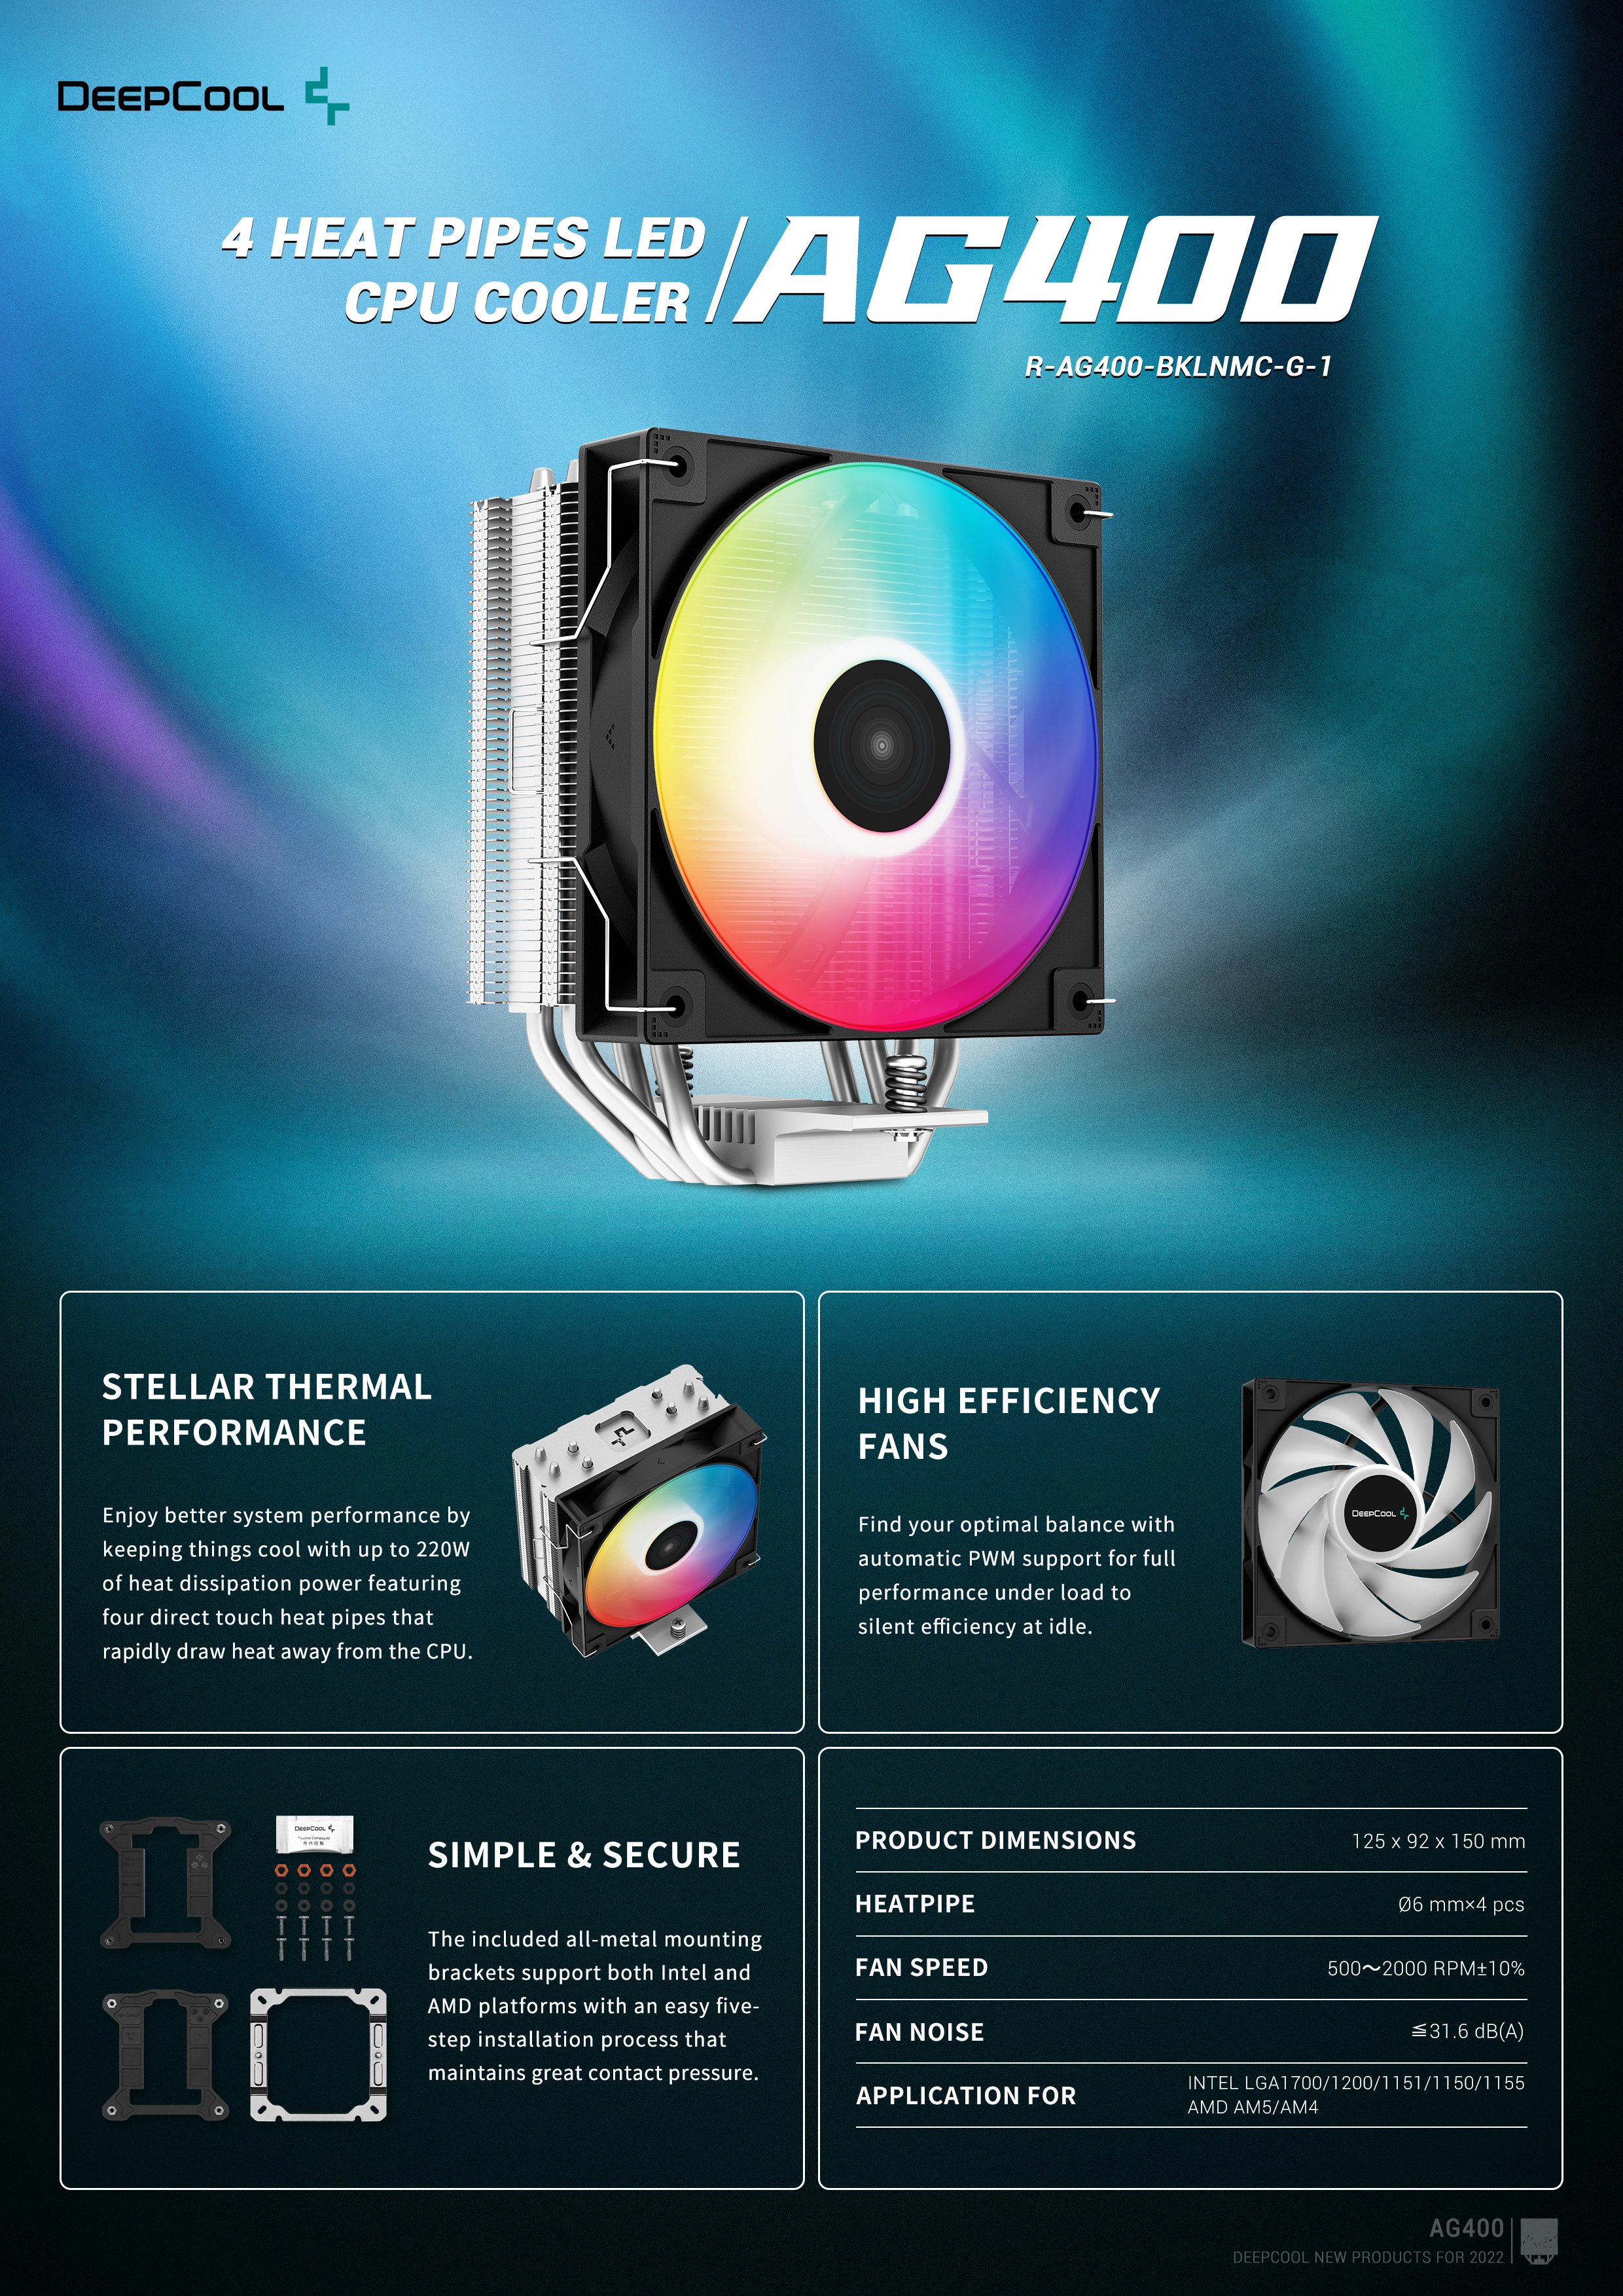 A large marketing image providing additional information about the product DeepCool AG400 LED CPU Cooler - Additional alt info not provided